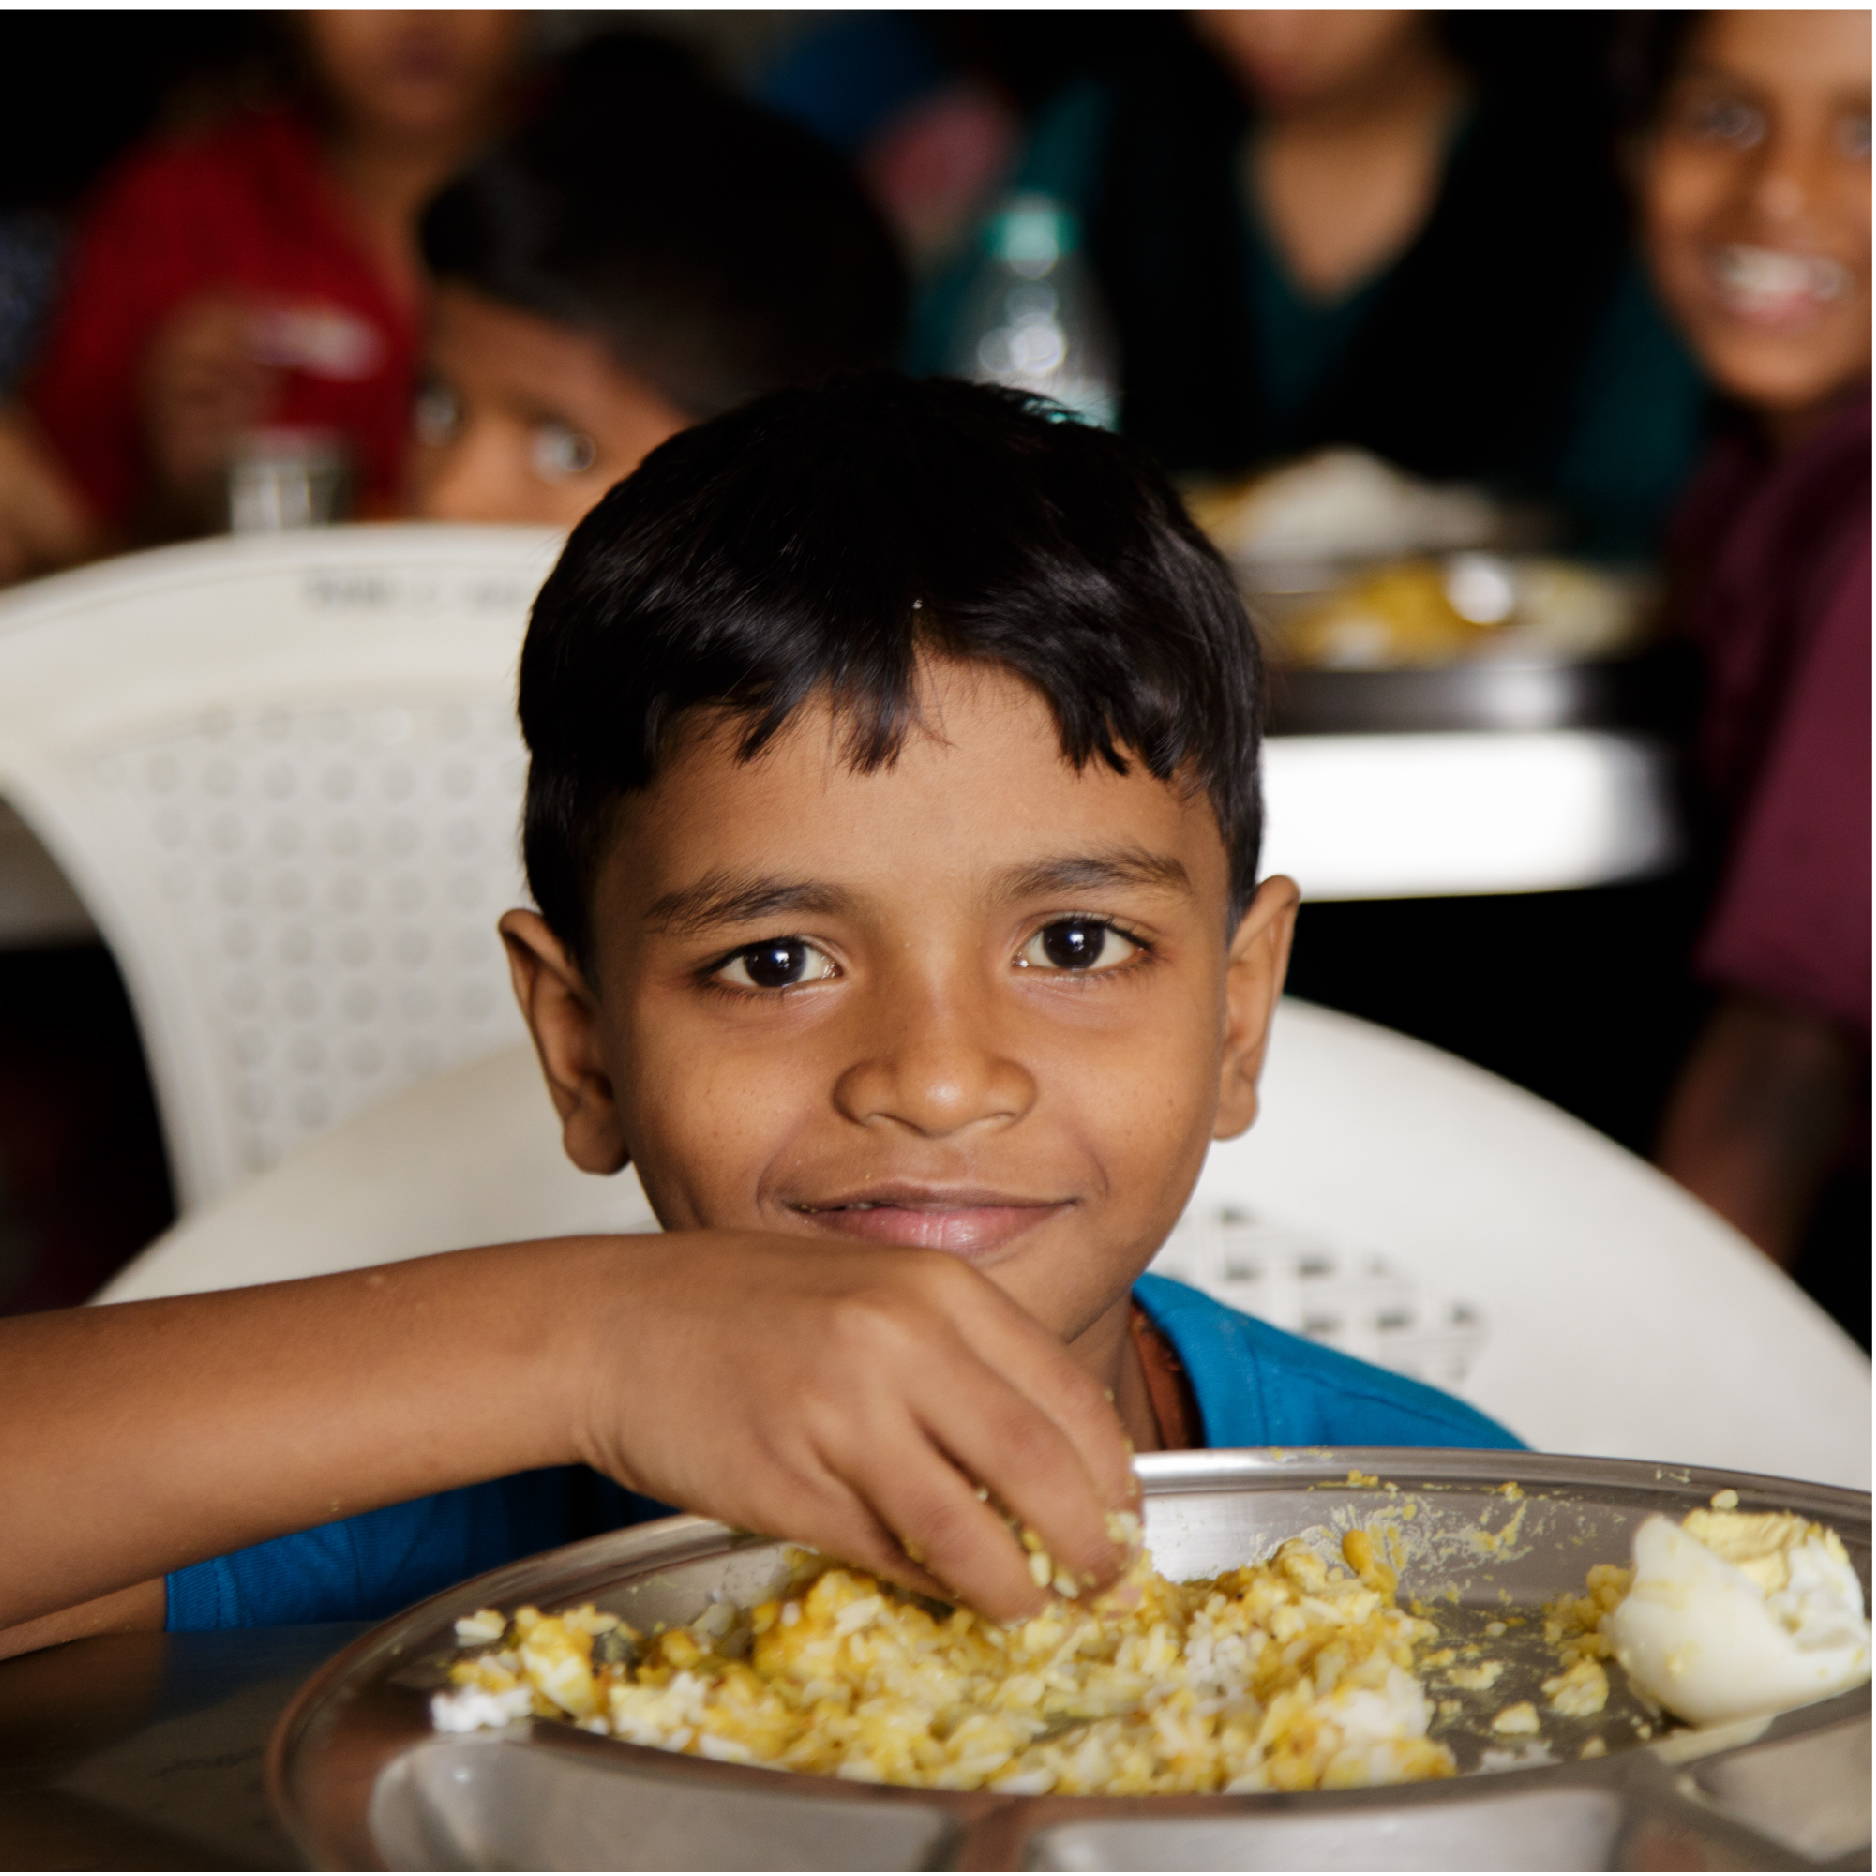 A young Indian boy sits at a table eating some rice and a hard boiled egg. 